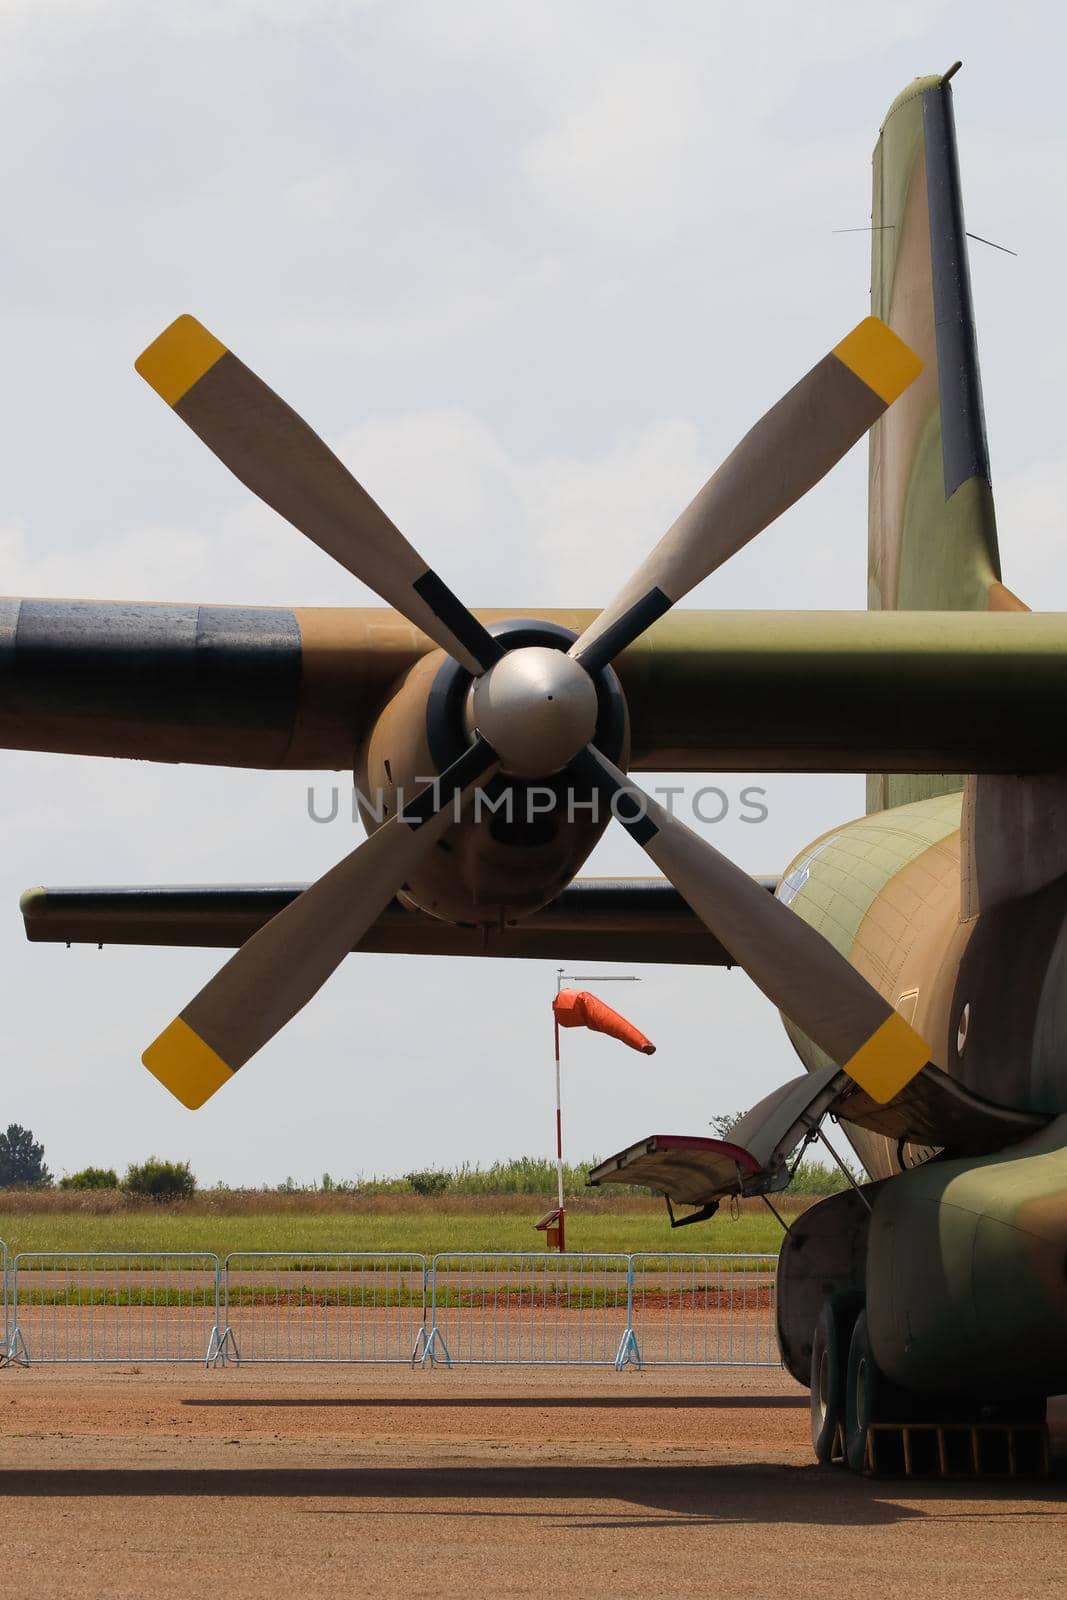 Military transport aircraft propeller engine close-up with airport wind sock, South Africa